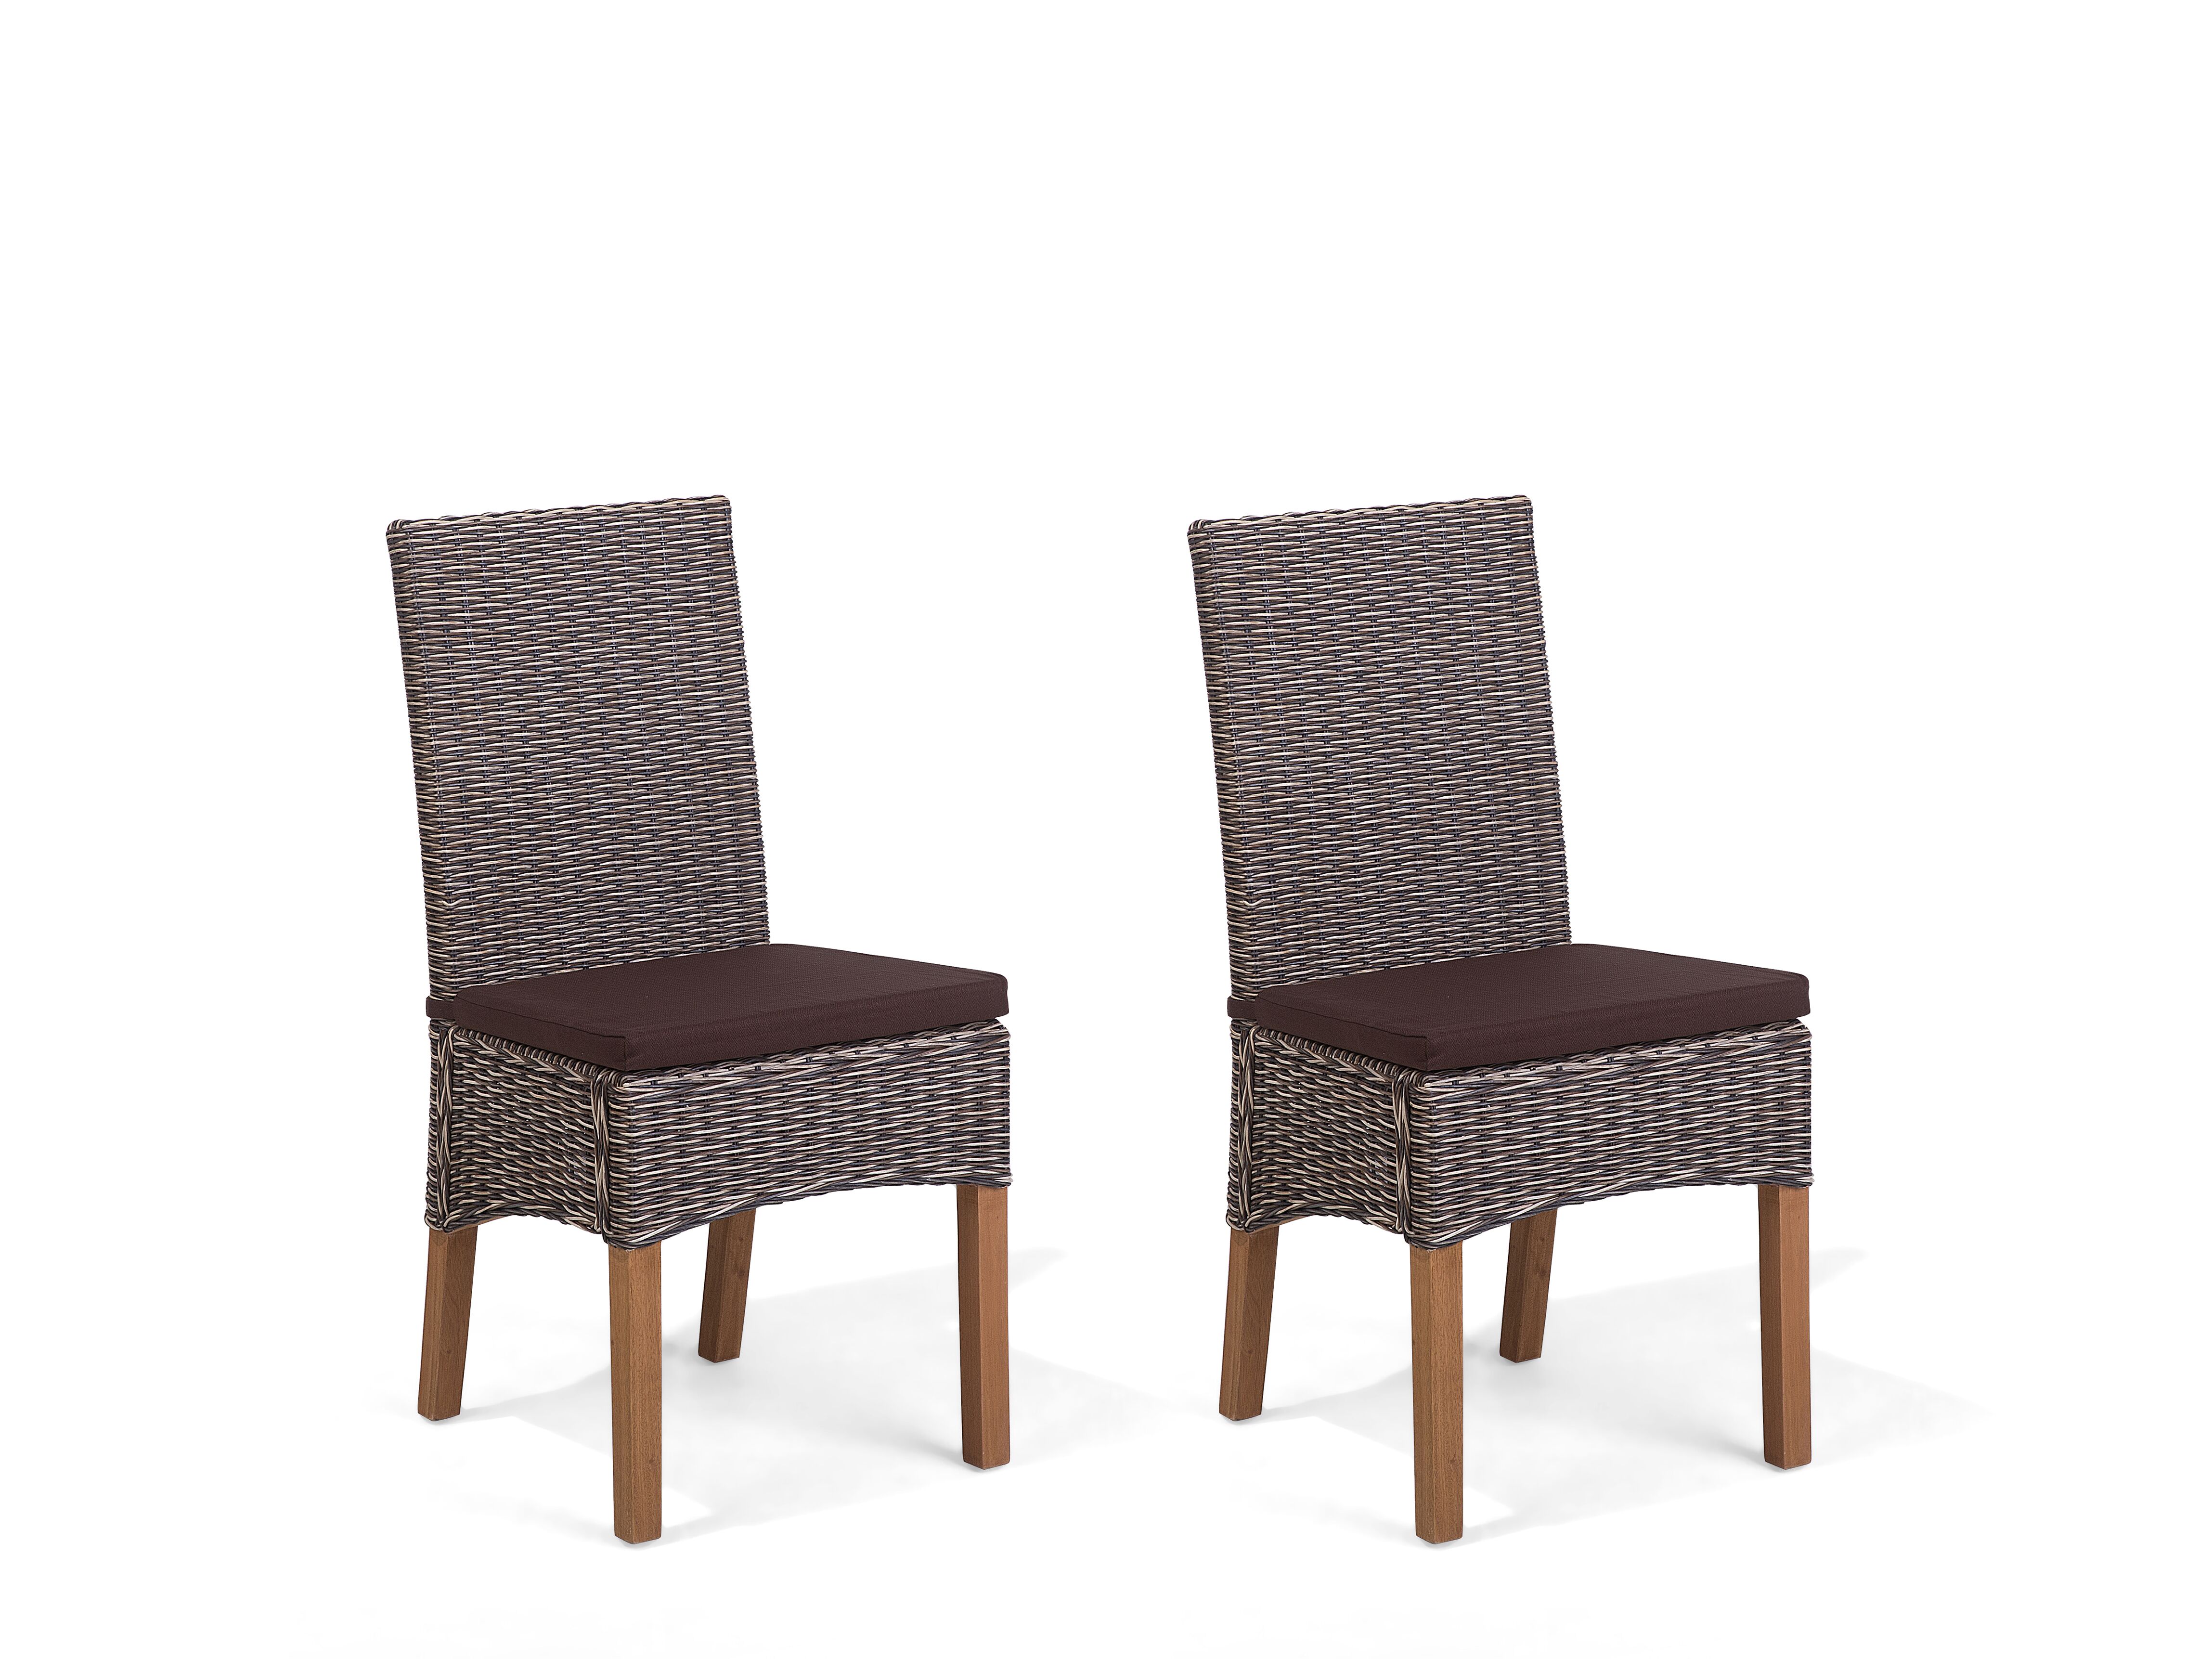 High Back Wicker Dining Room Chairs